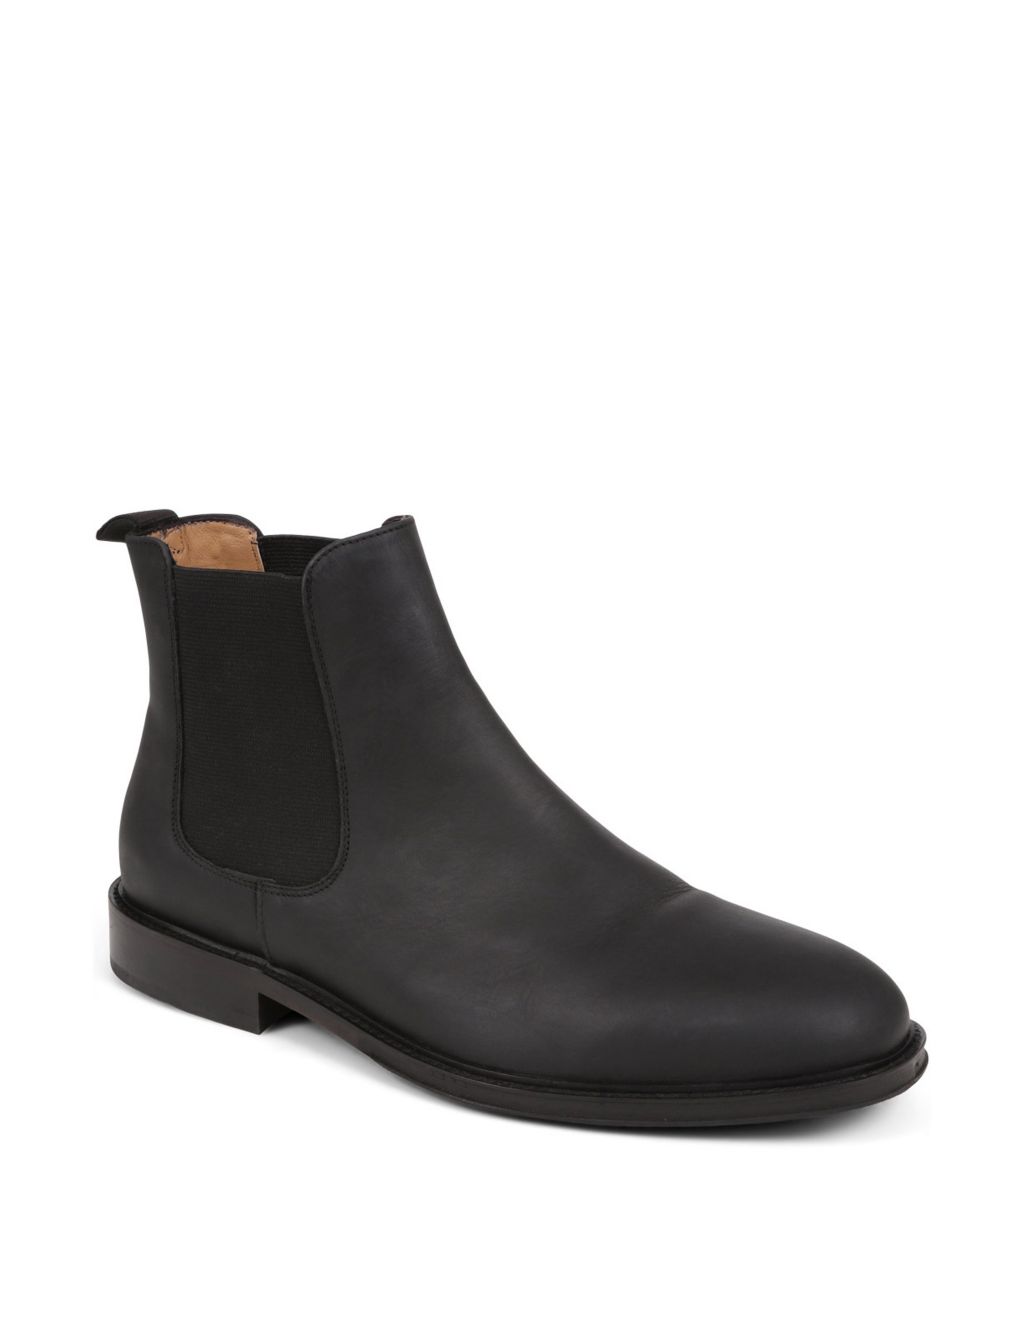 Leather Pull On Chelsea Boots image 6